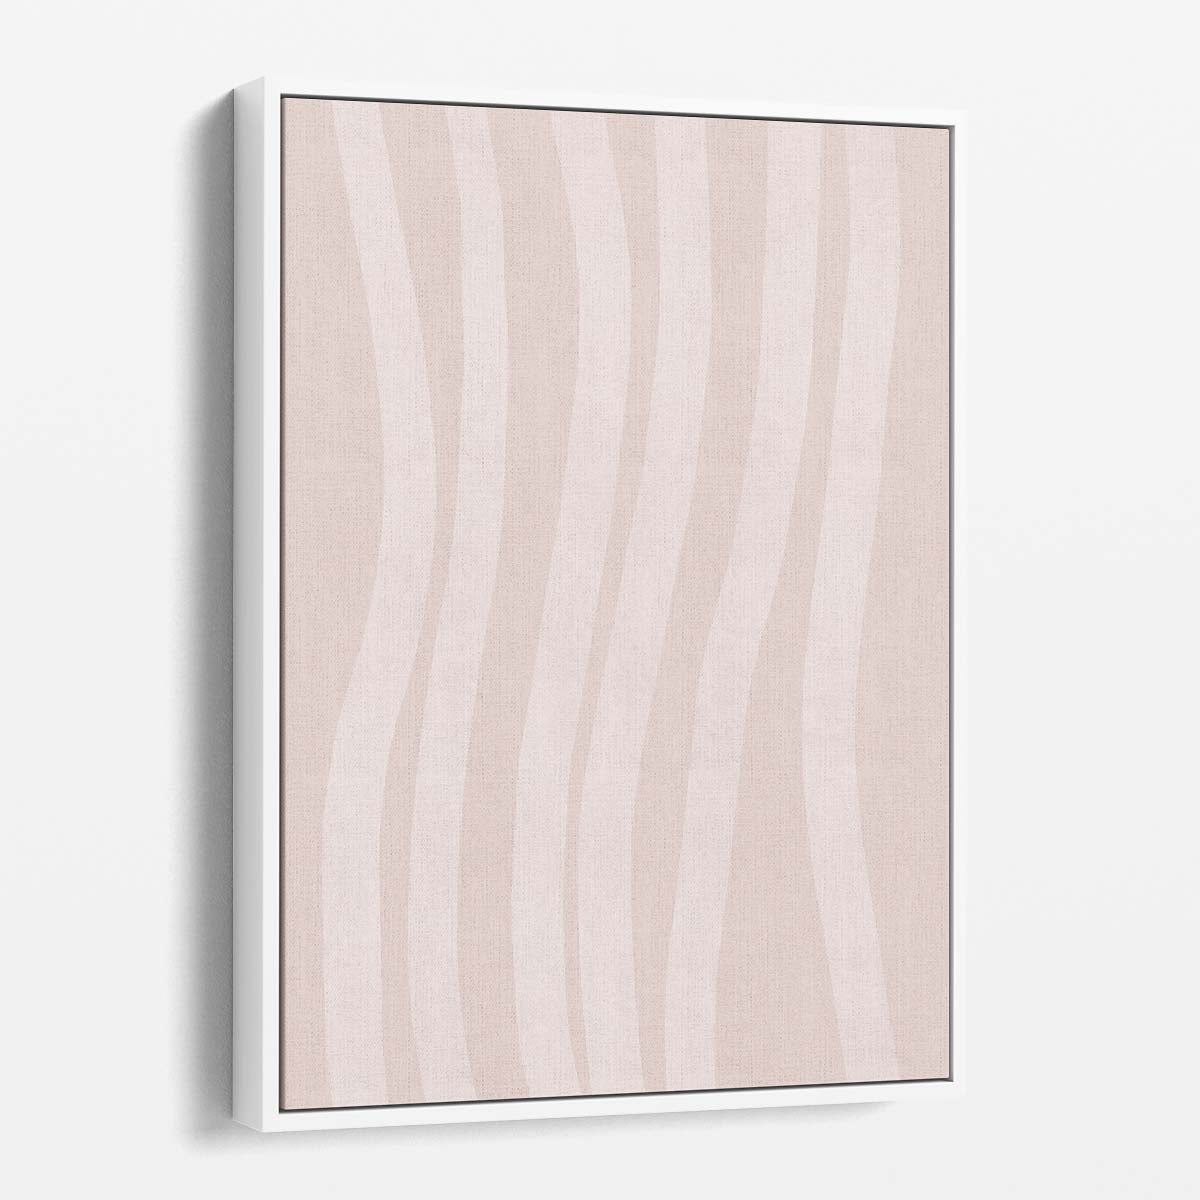 Abstract Pink Stripes Illustration Art by Uplusmestudio, Graphic Abstraction by Luxuriance Designs, made in USA